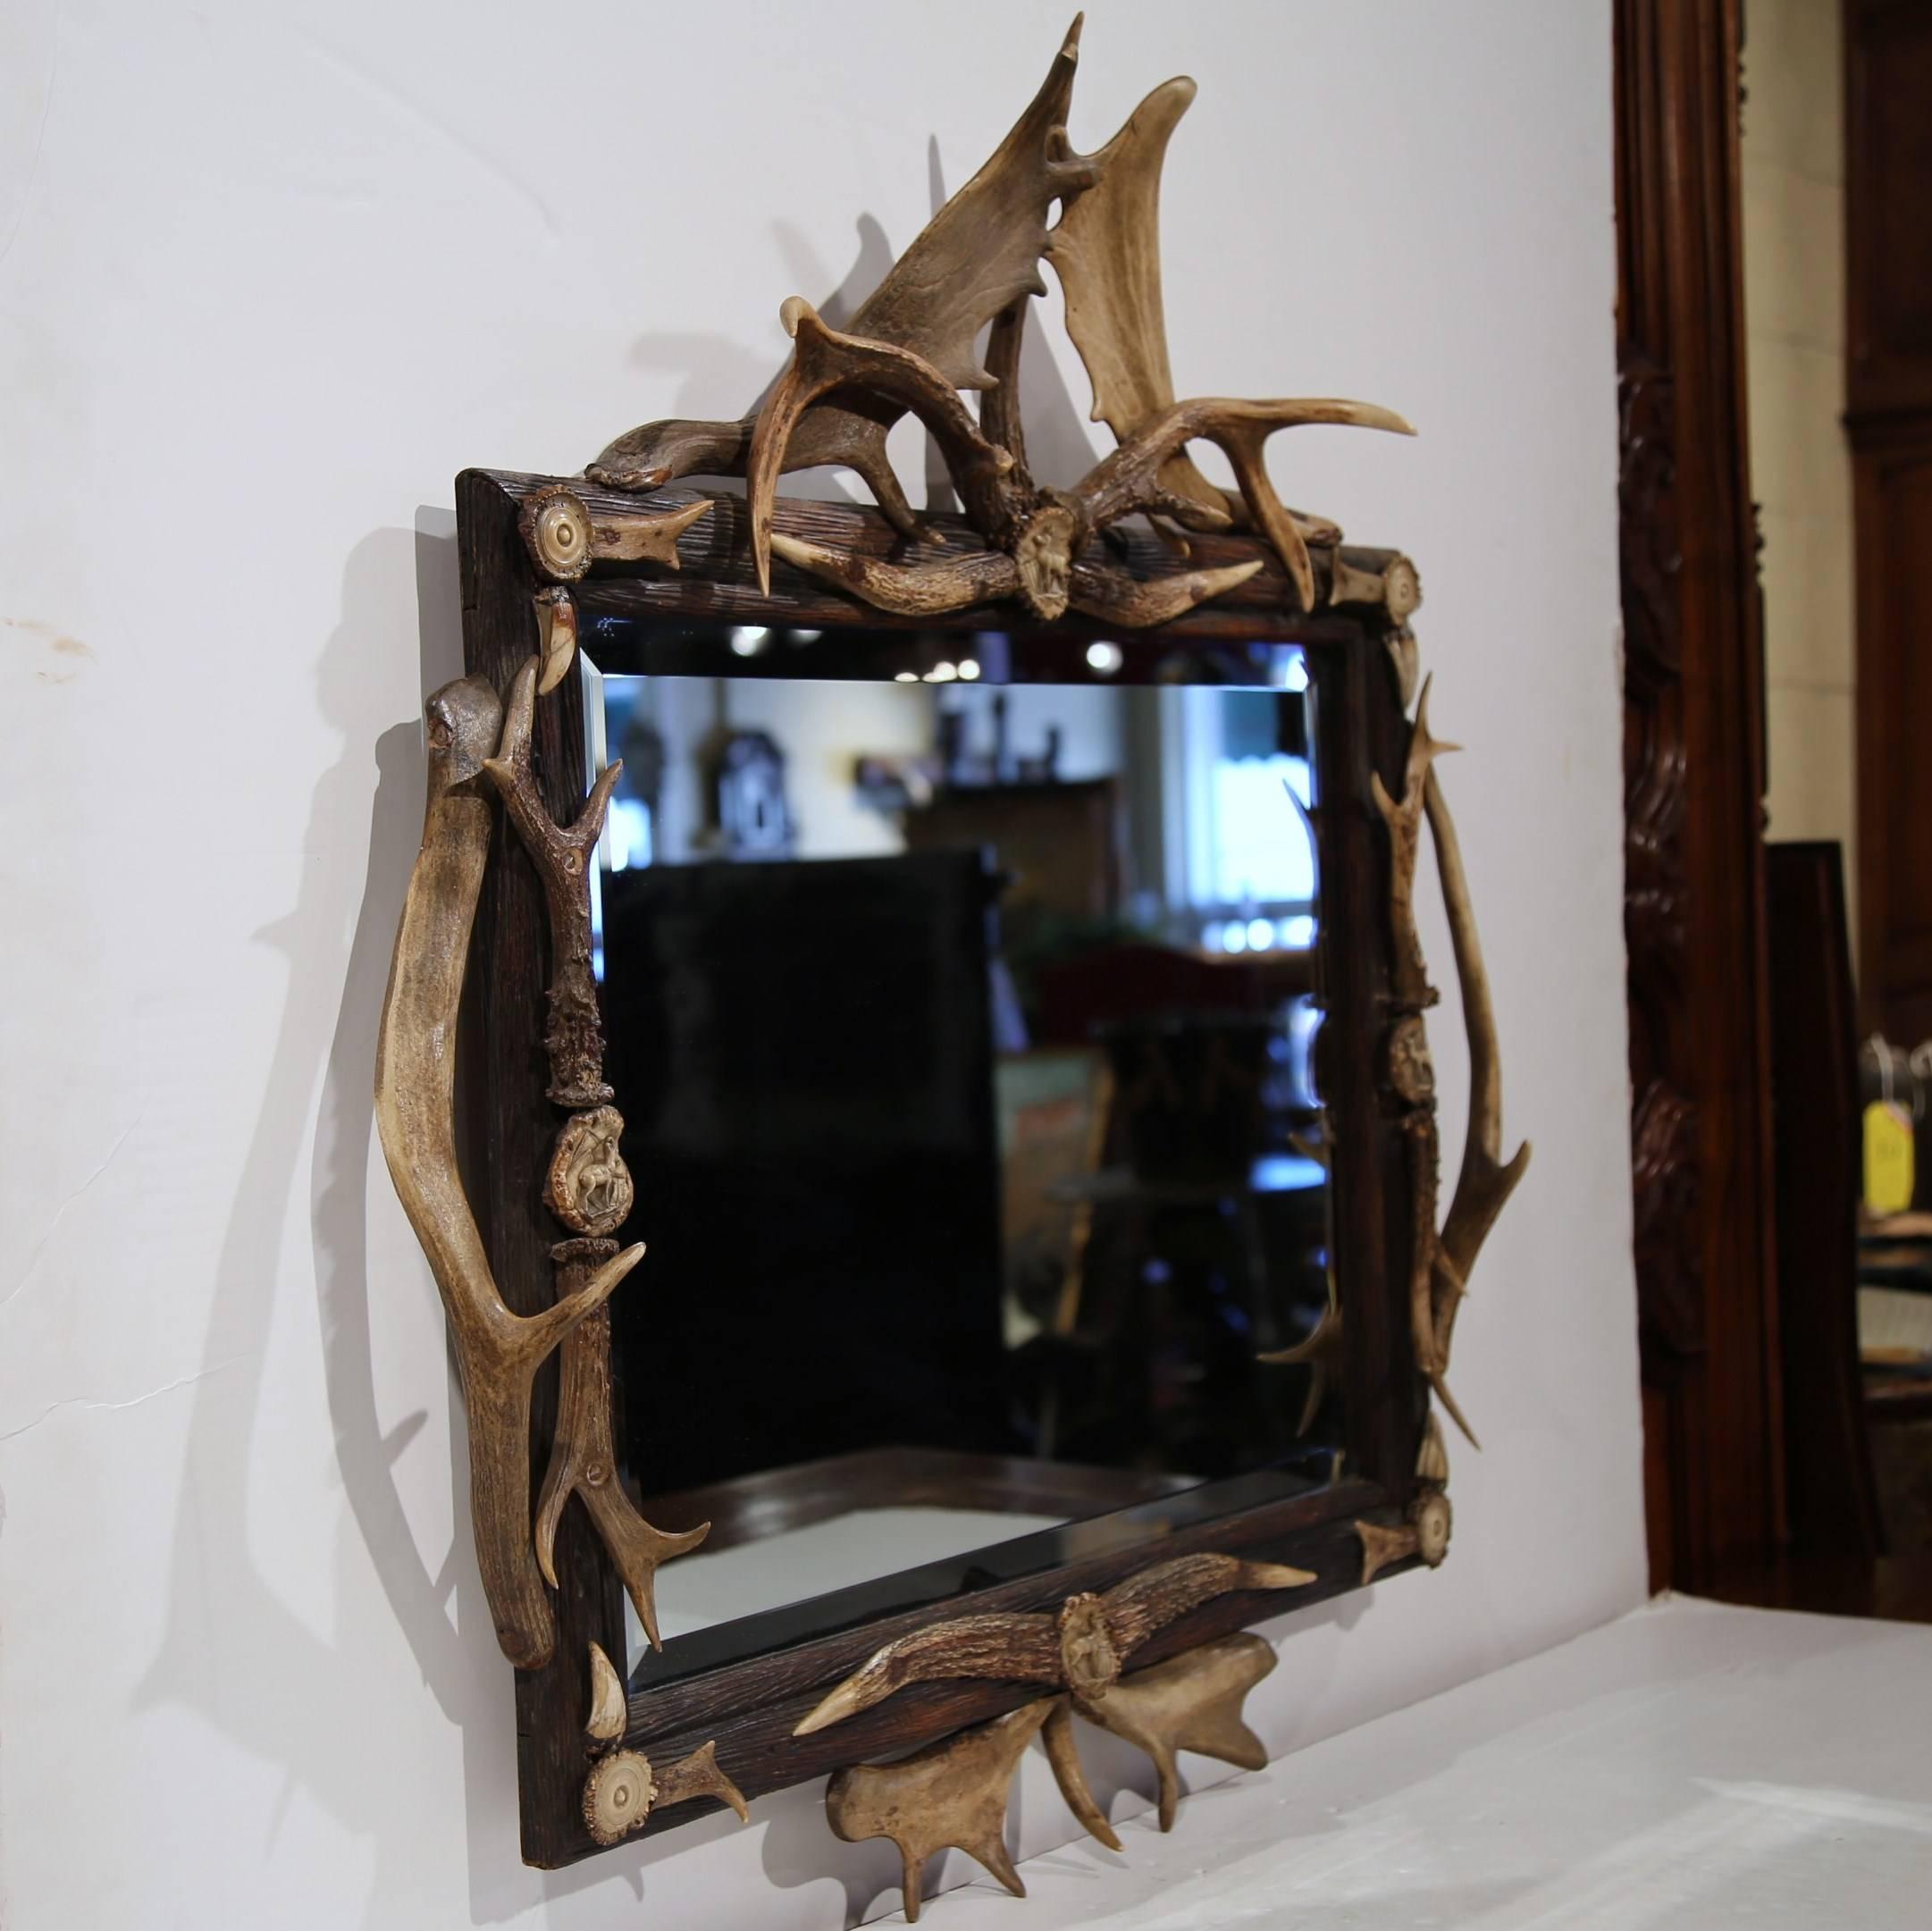 Fabulous antique mirror from Switzerland, circa 1860 with elk, chamois and deer antlers around the frame. Each center medallion features a carved deer with additional round medallions in every corner. Original beveled glass mirror.